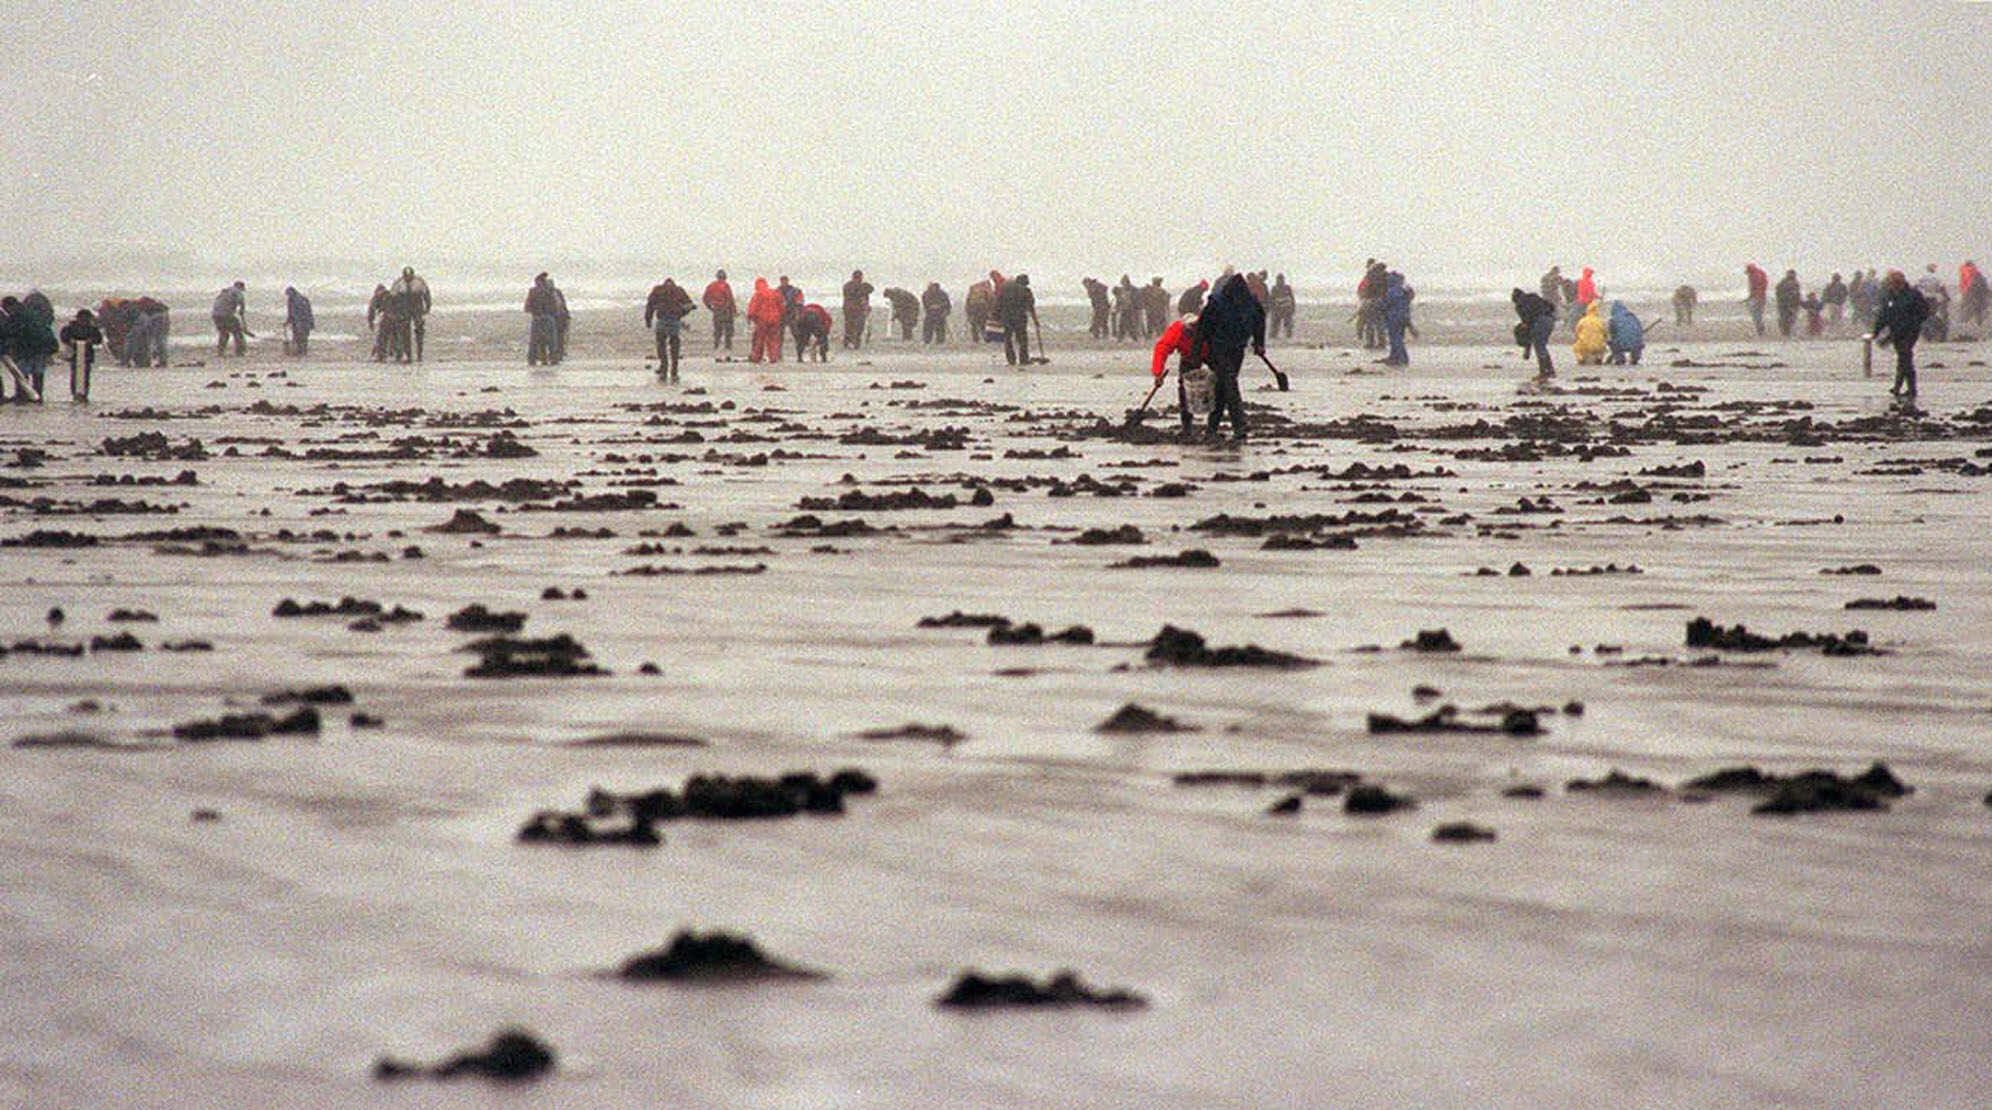 Razor clam digging scheduled at Twin Harbors beach for Friday has been cancelled due to an elevated level of domoic acid, a natural marine toxin.